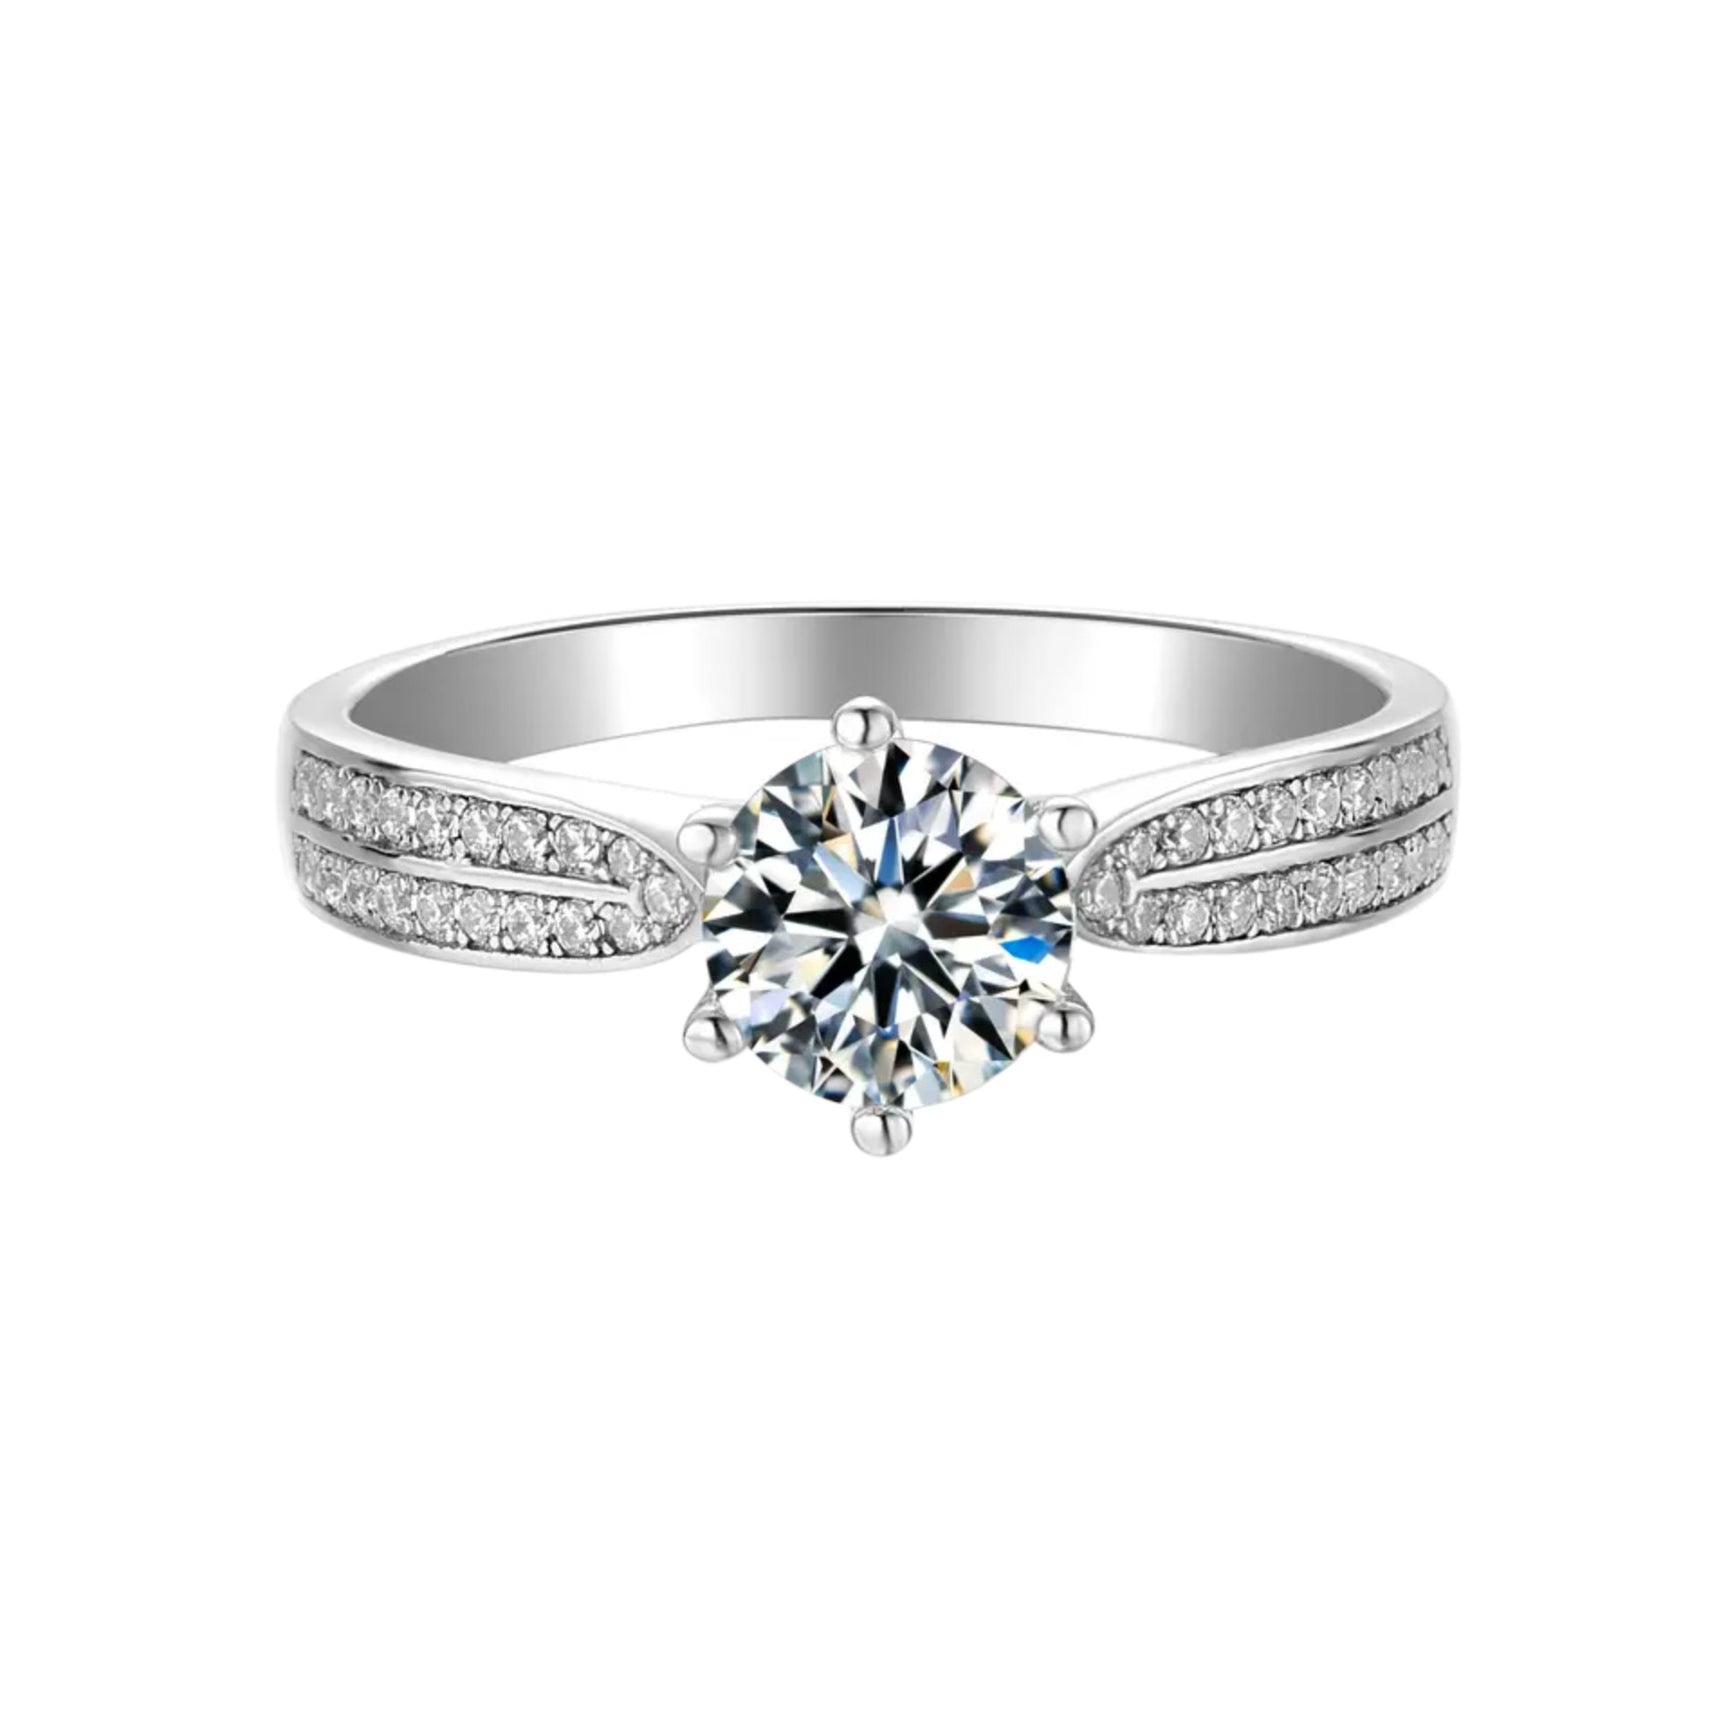 One Carat Brilliant Round Cut Moissanite Double Pave Solitaire Engagement Ring in Platinum Plated Sterling Silver - Boutique Pavè